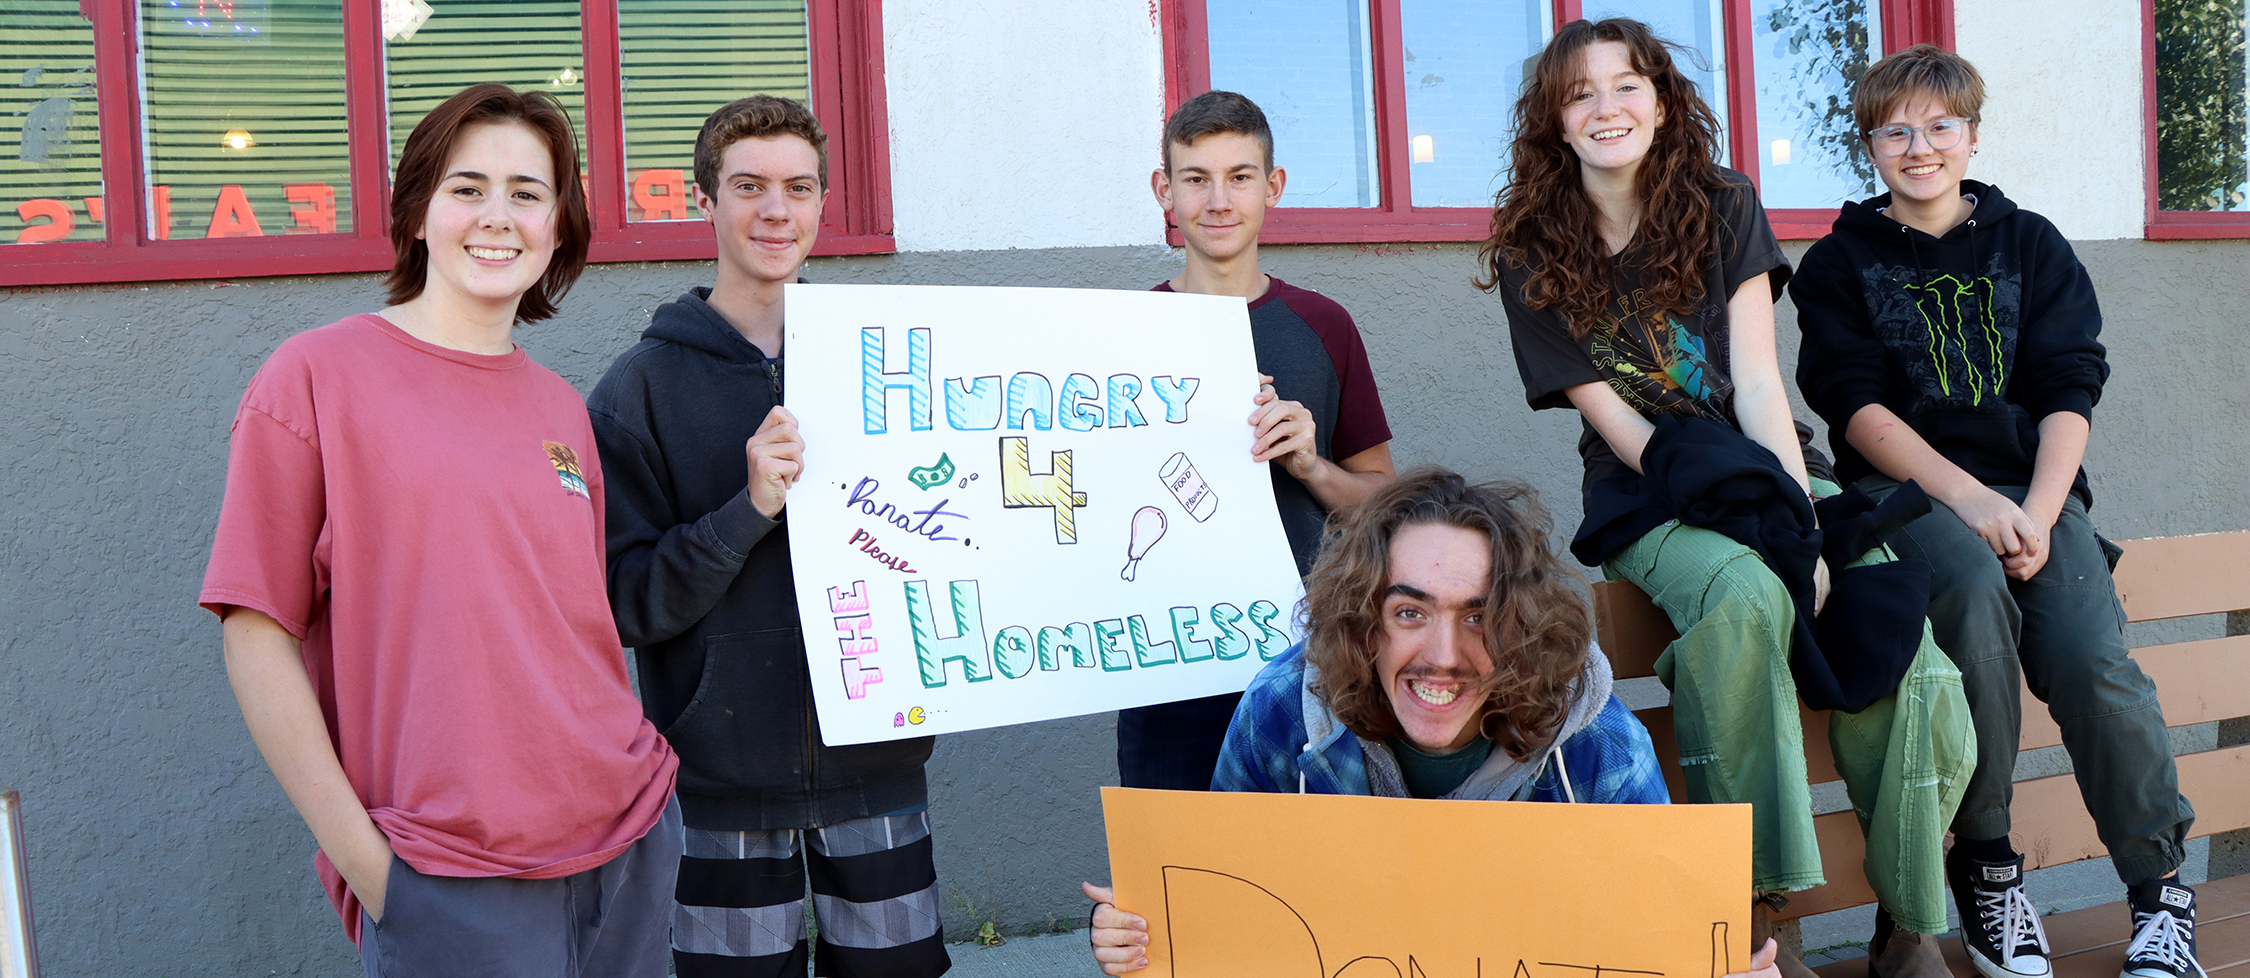 Students holding signs for fundraiser